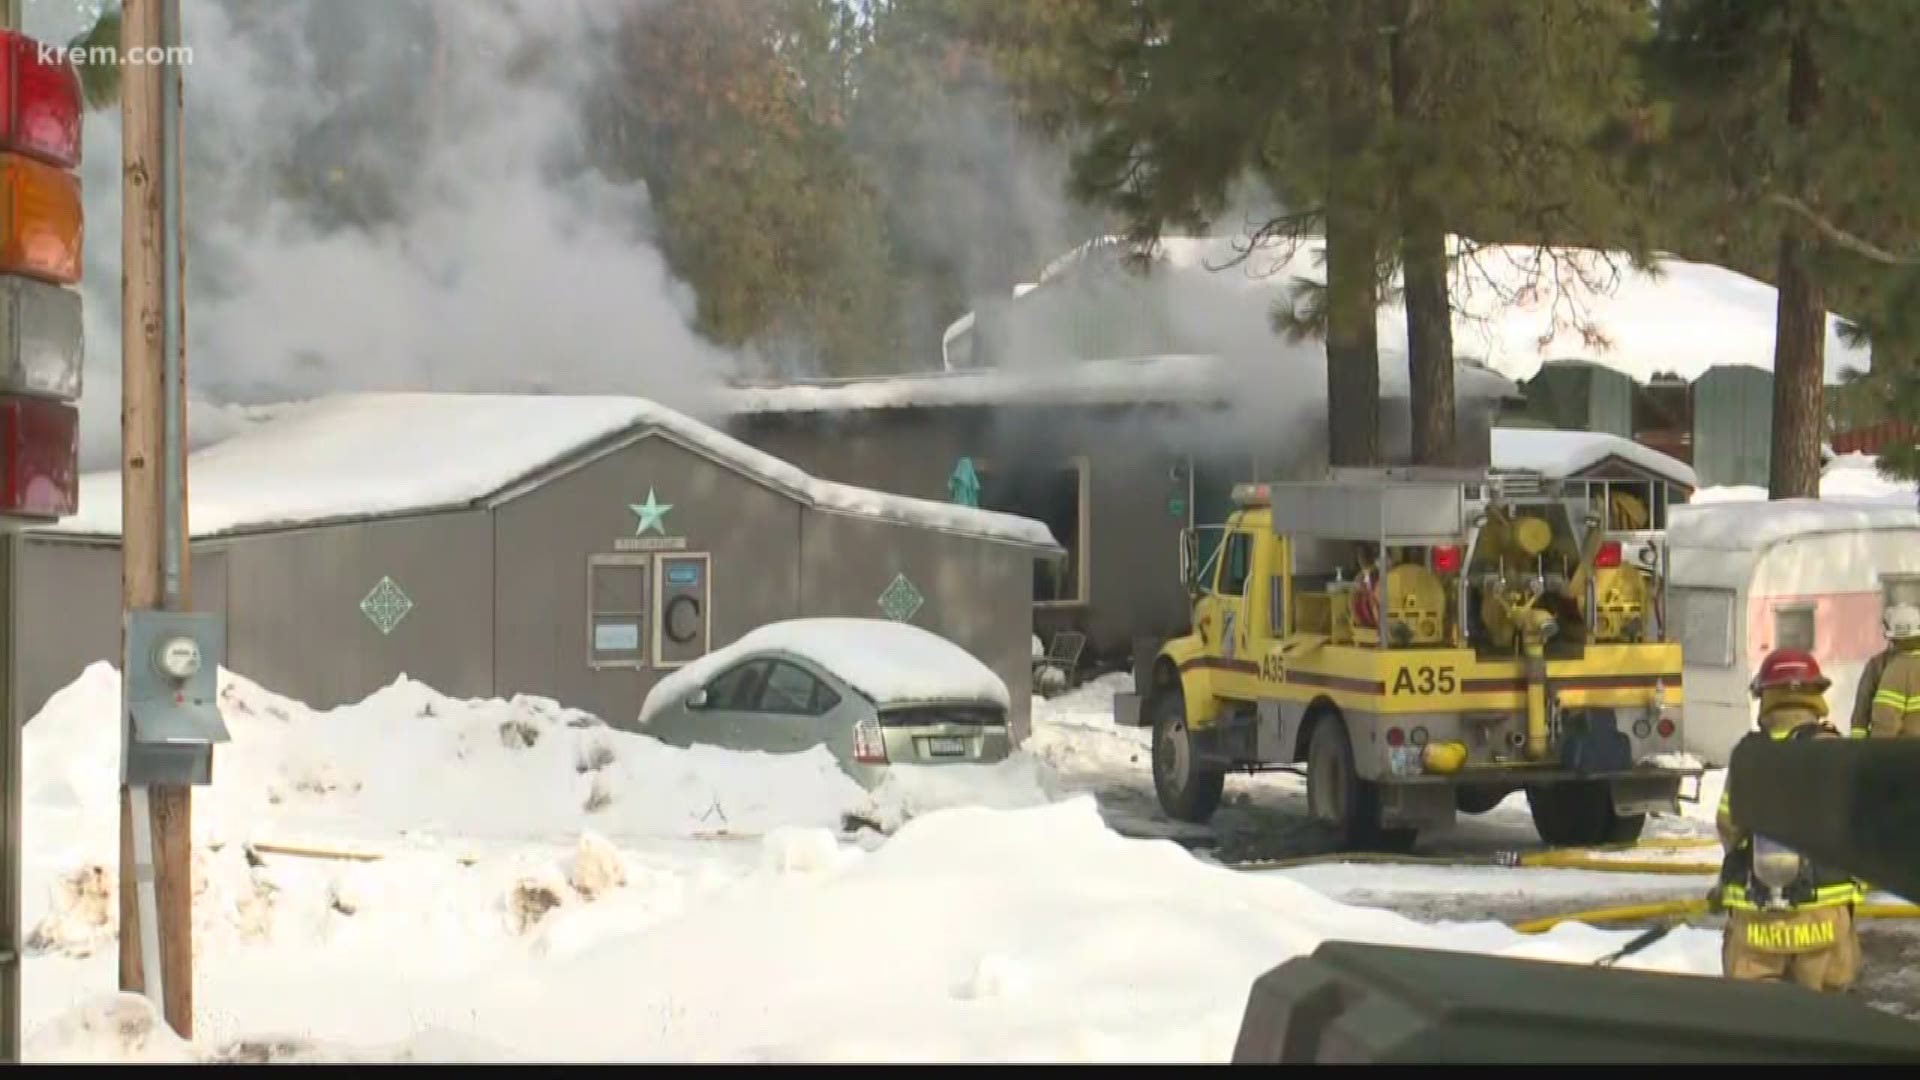 The homeowner unsuccessfully tried to use snow to put out the fire. No one was injured.